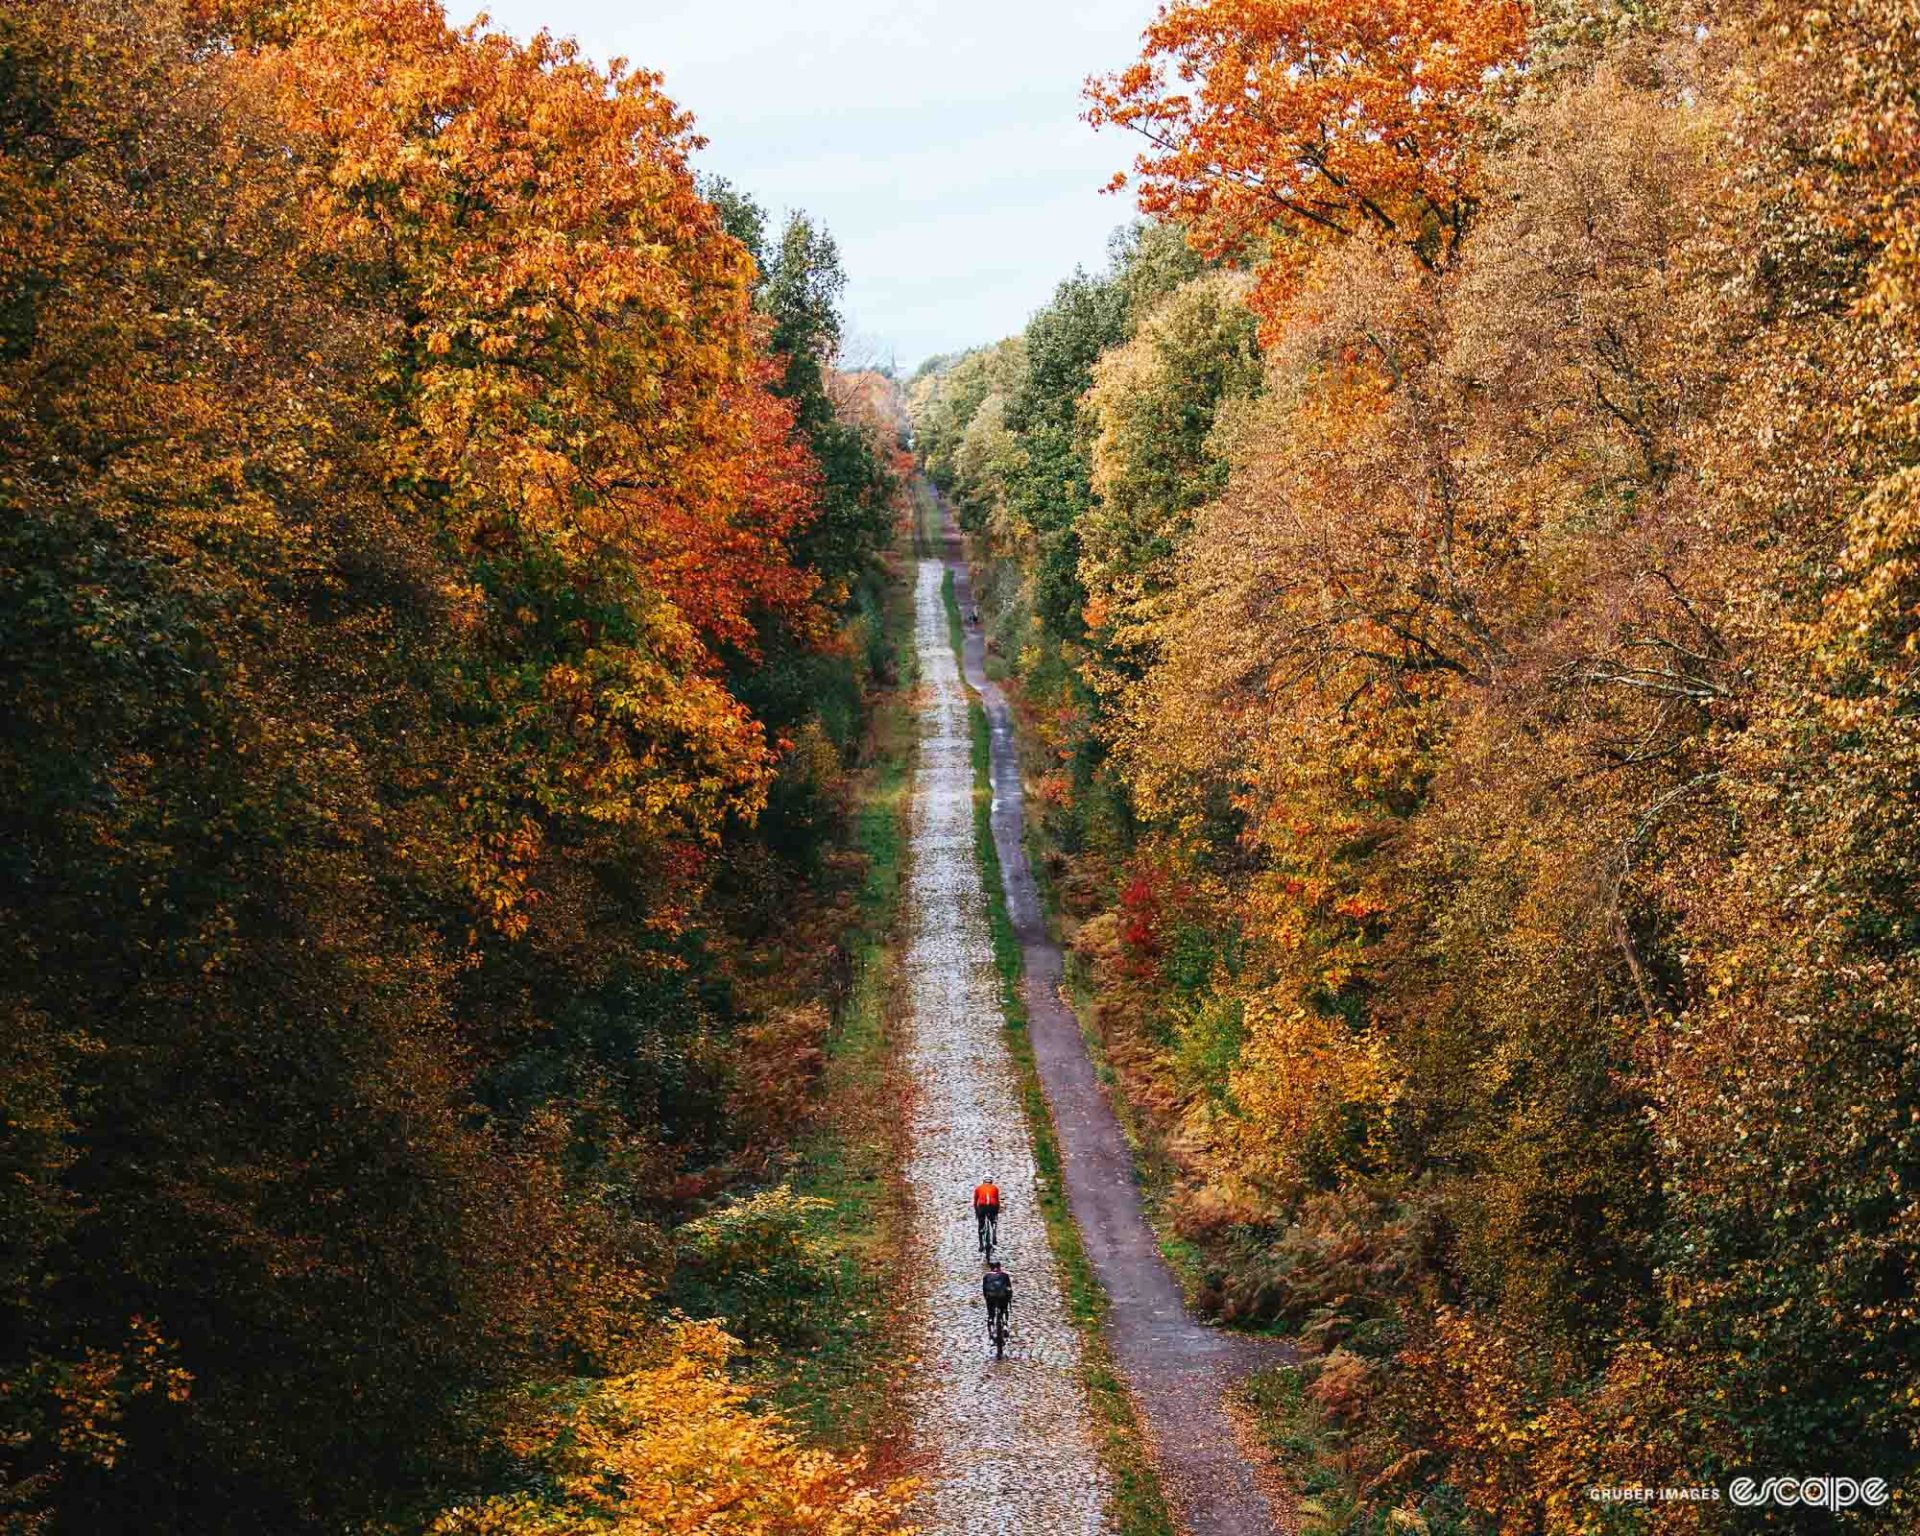 The road through the Forest of Arenberg, shot from above. The trees are all autumnal, many hues of orange and yellow and red, and in the centre are the tiny figures of two cyclists. 